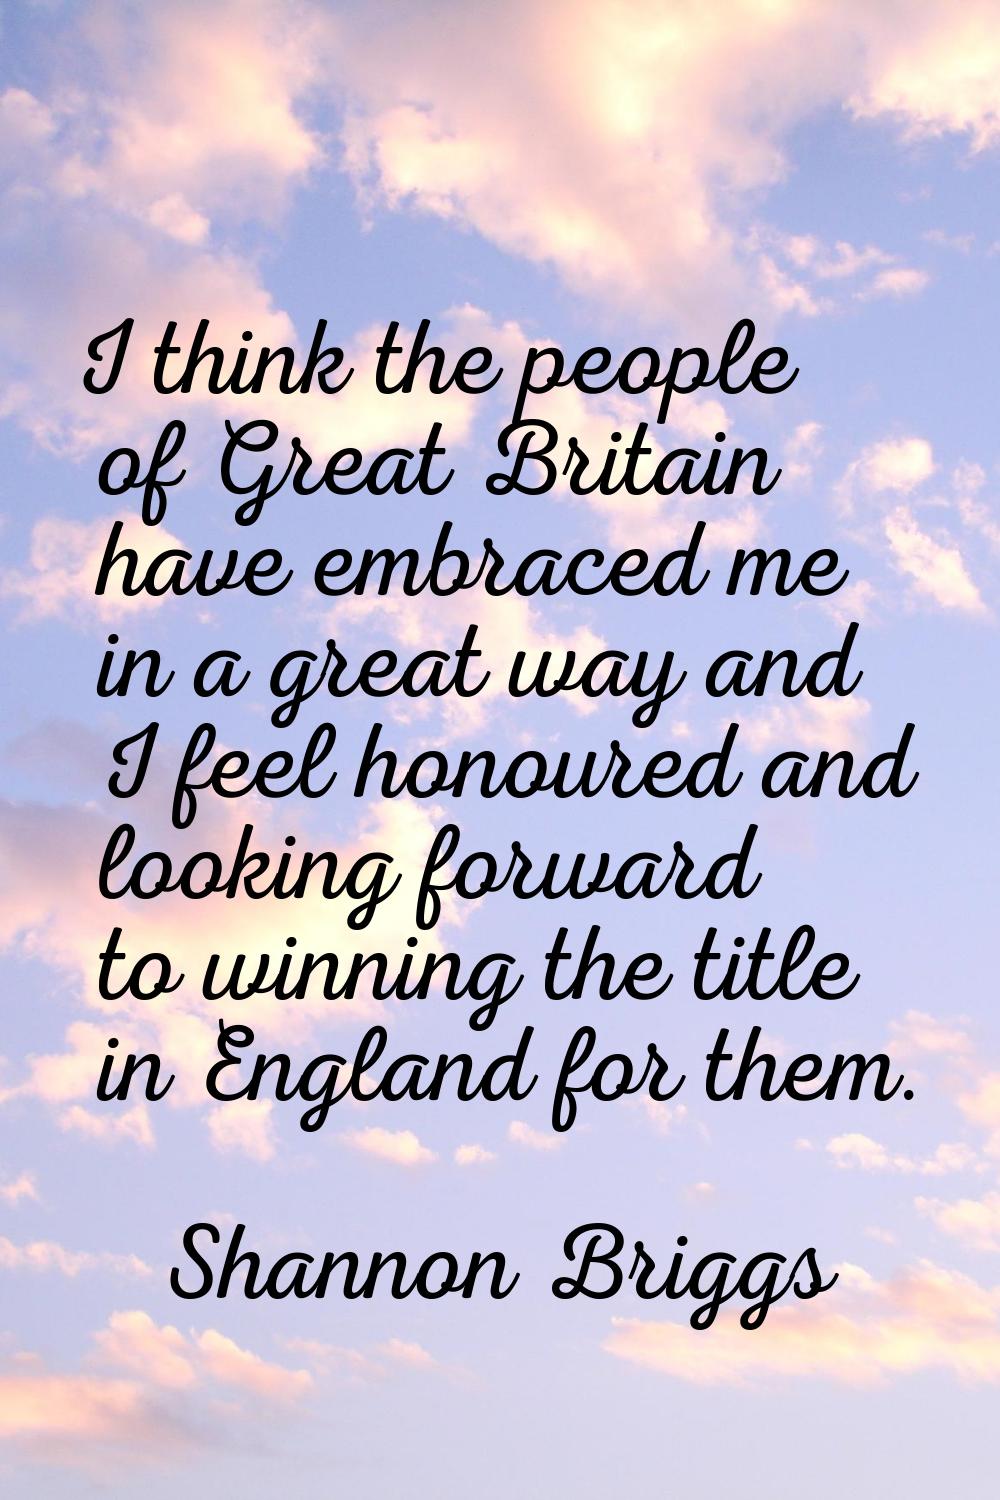 I think the people of Great Britain have embraced me in a great way and I feel honoured and looking